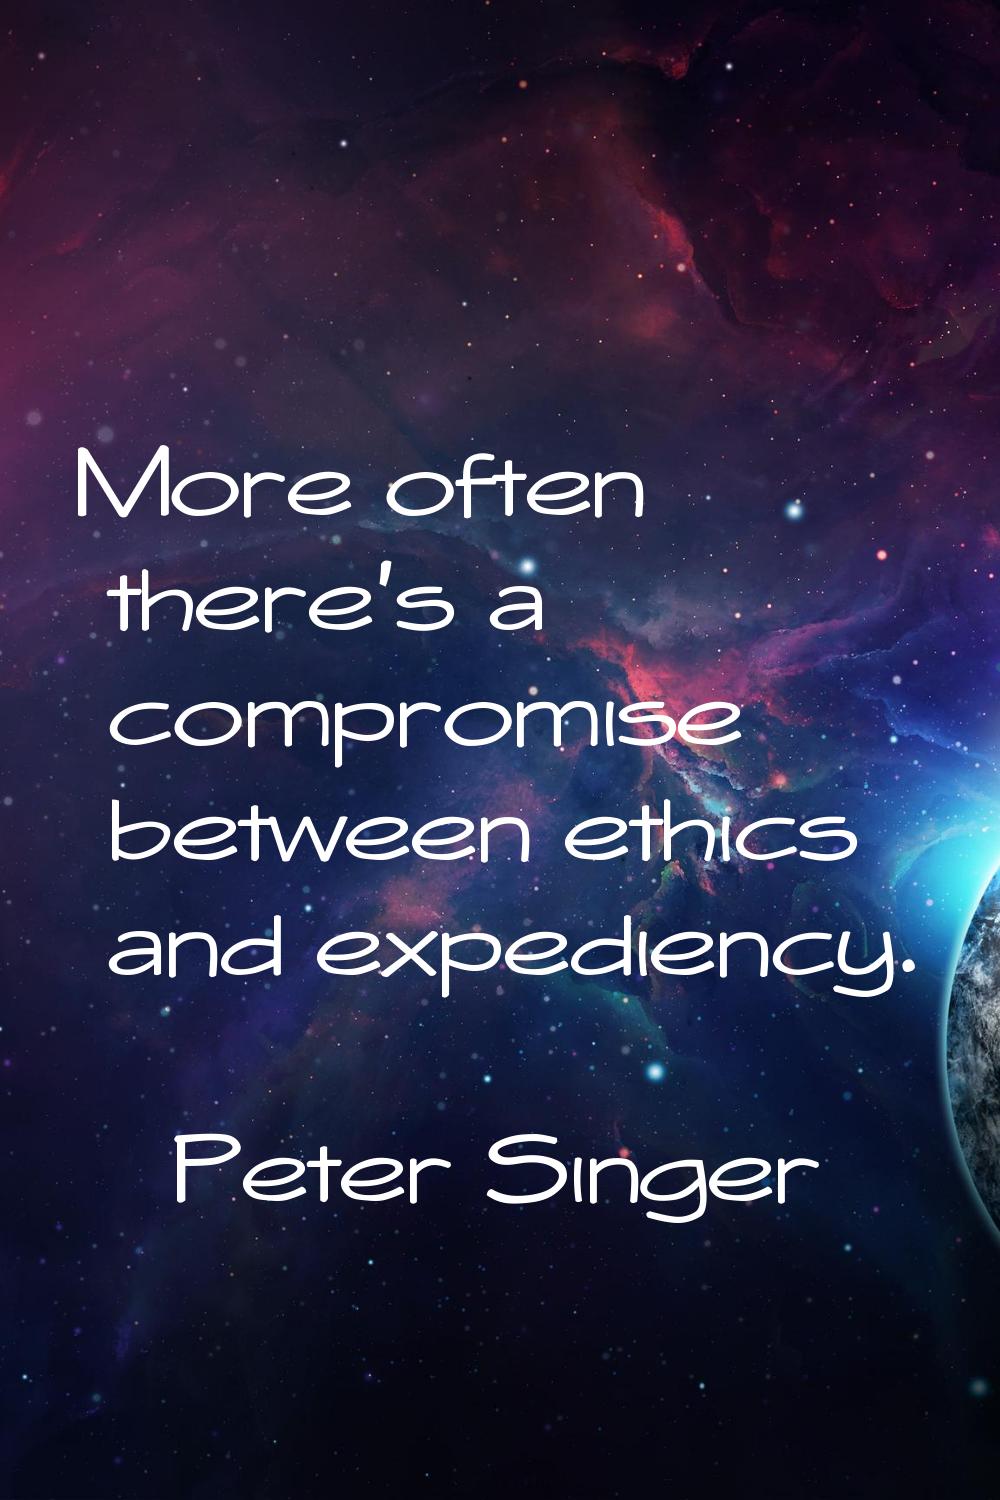 More often there's a compromise between ethics and expediency.